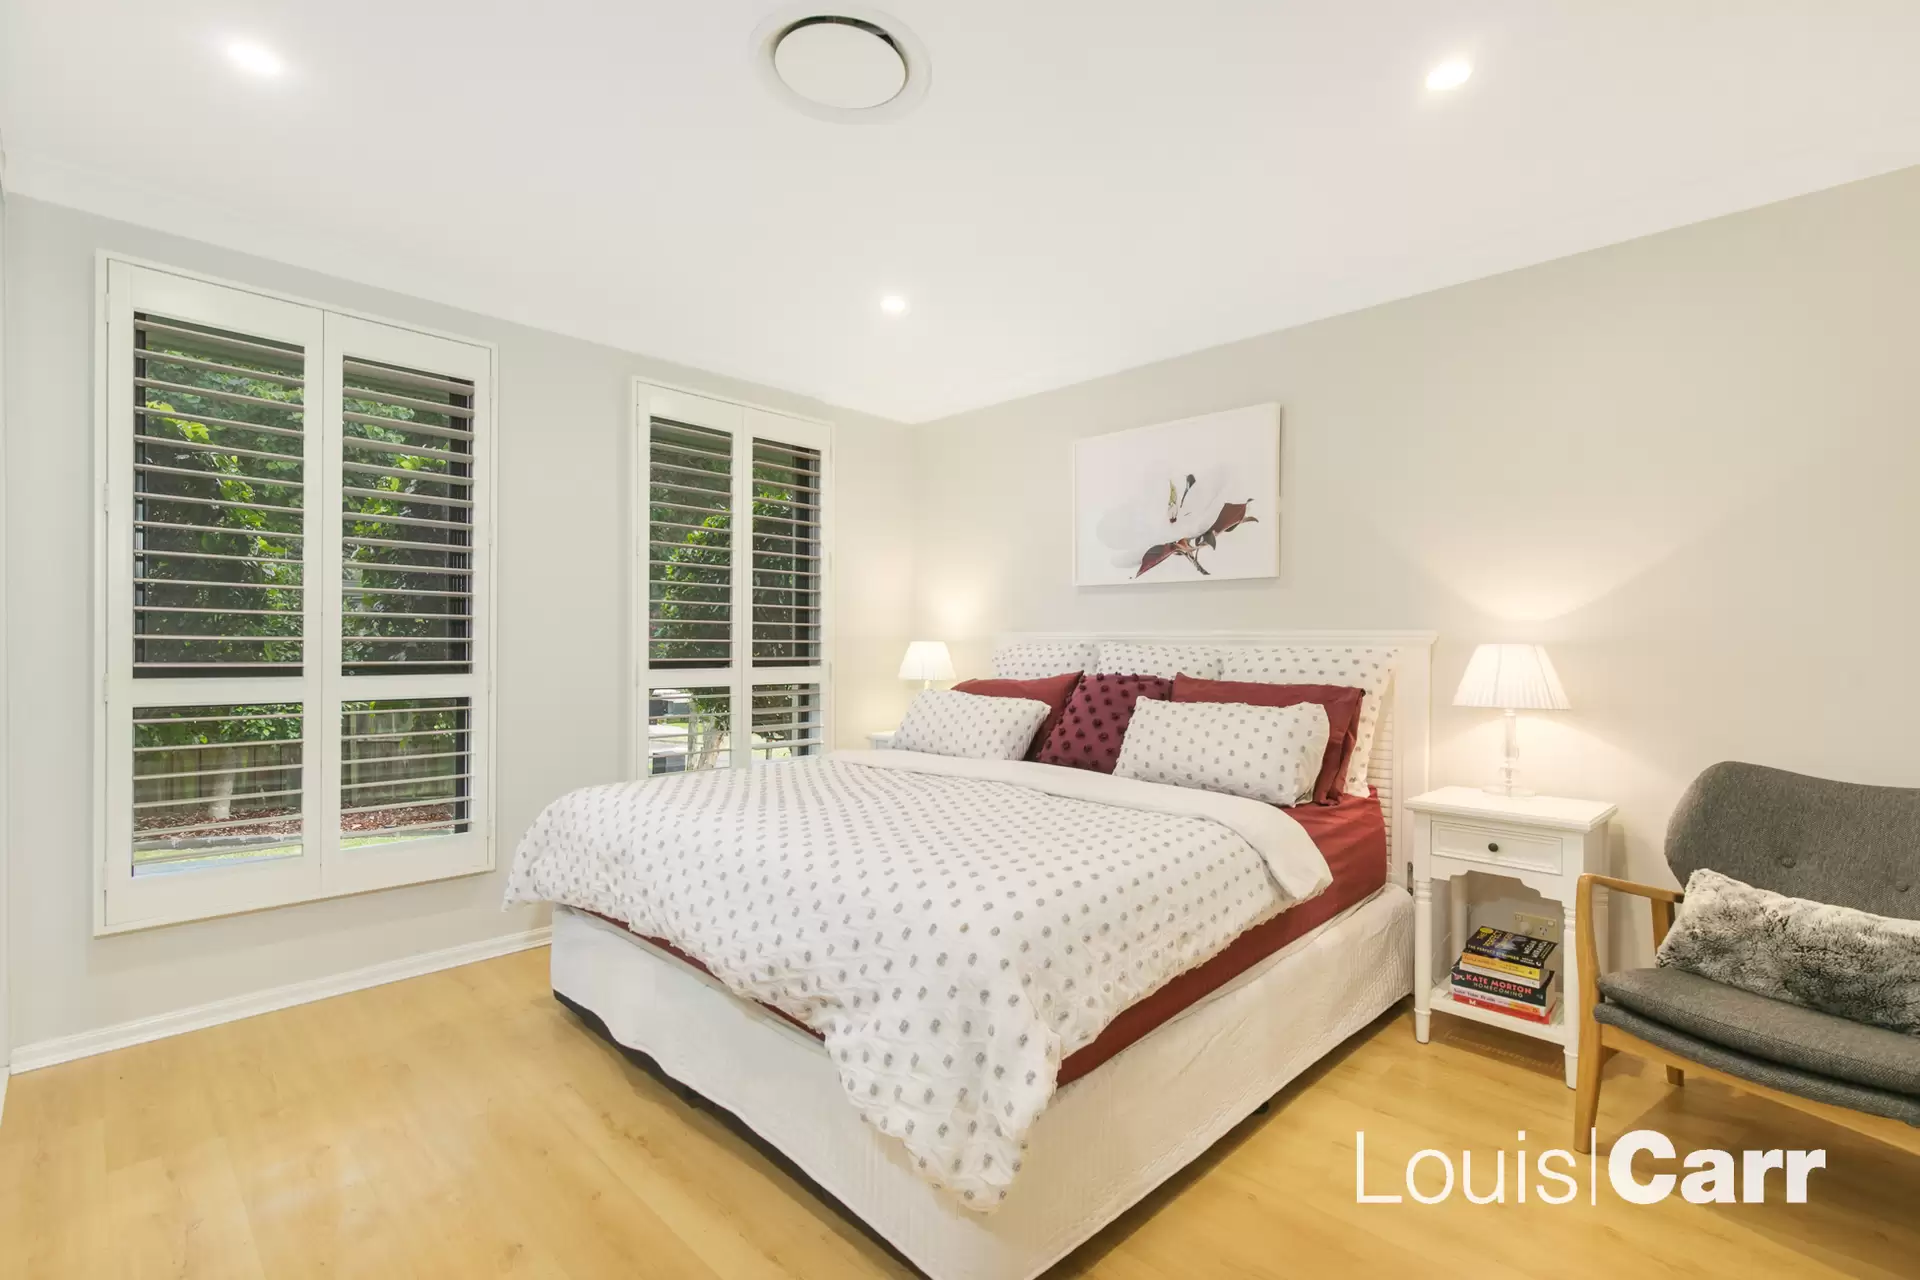 Photo #6: 14 Lee Road, West Pennant Hills - For Sale by Louis Carr Real Estate